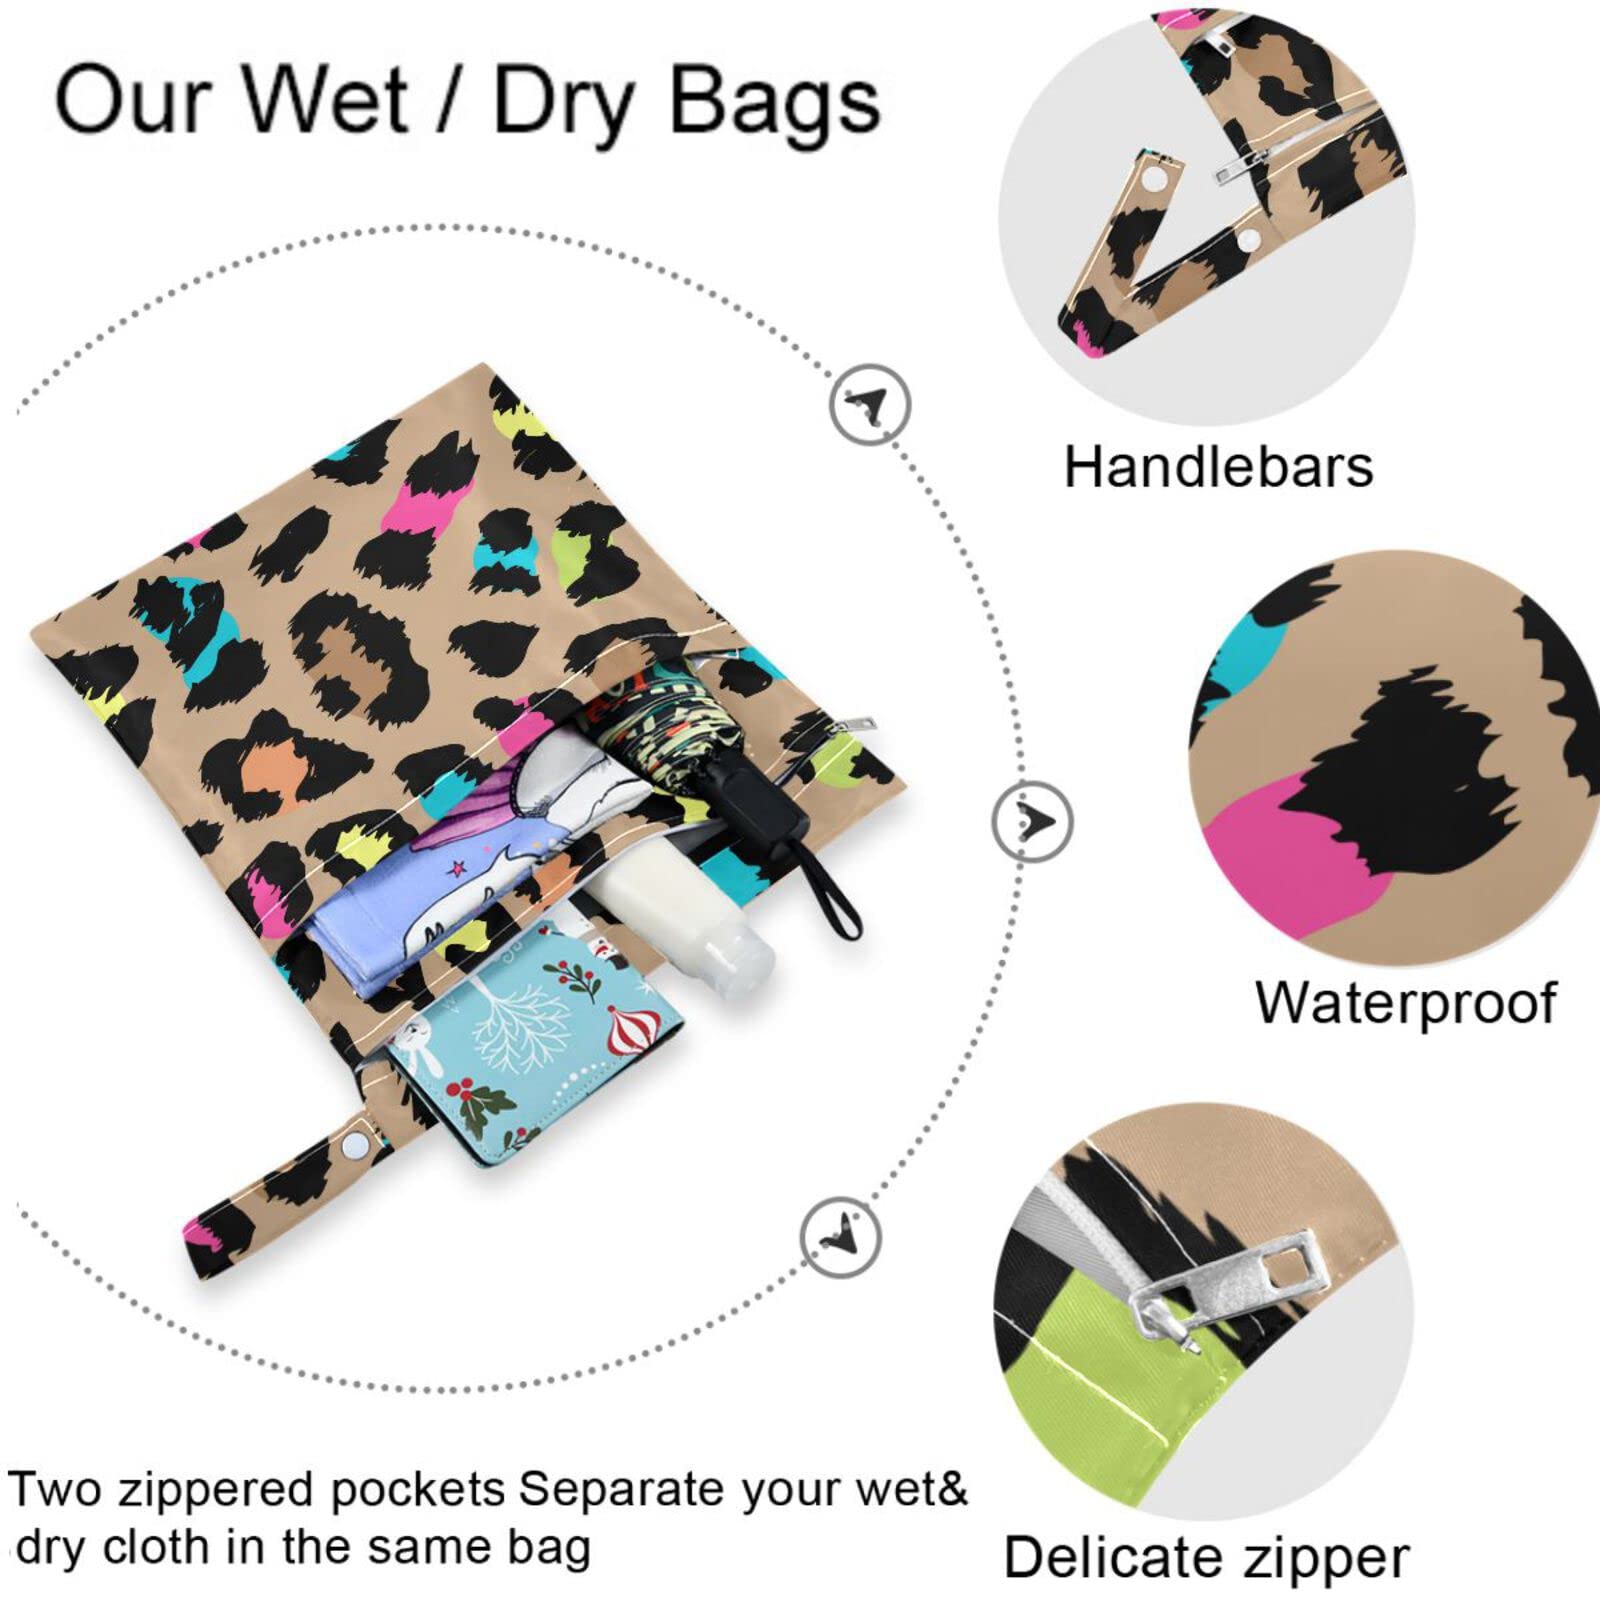 visesunny Brown Leopard Grain 2Pcs Diaper Changing Totes Wet Bags with Zippered Pockets Washable Reusable Roomy Cloth Diaper for Travel,Beach,Daycare,Stroller,Dirty Gym Clothes,Wet Swimsuits,Toiletrie